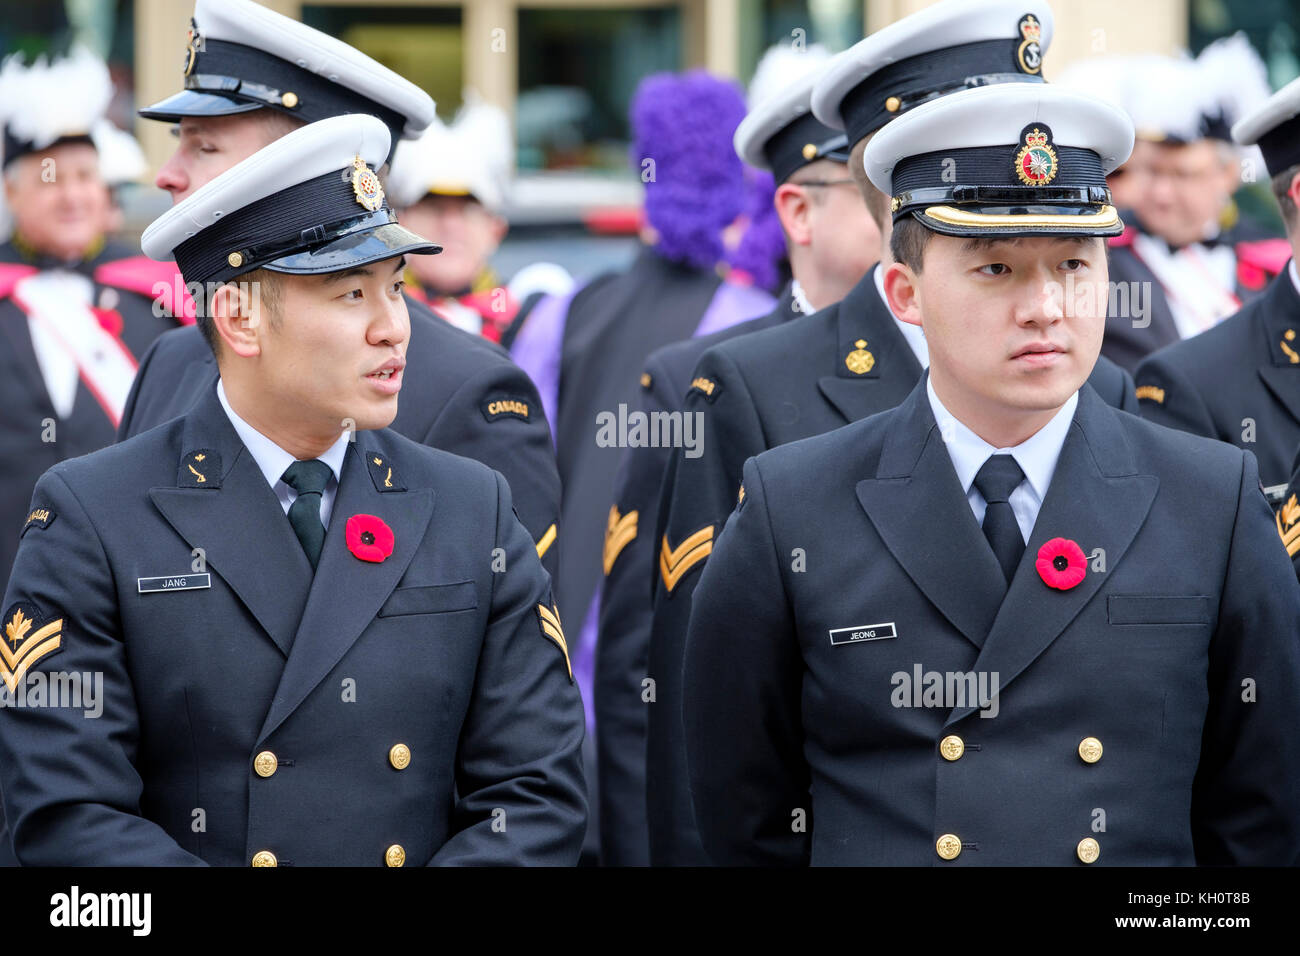 Two Asian servicemen at the Remembrance Day parade held in London, Ontario, Canada. Stock Photo